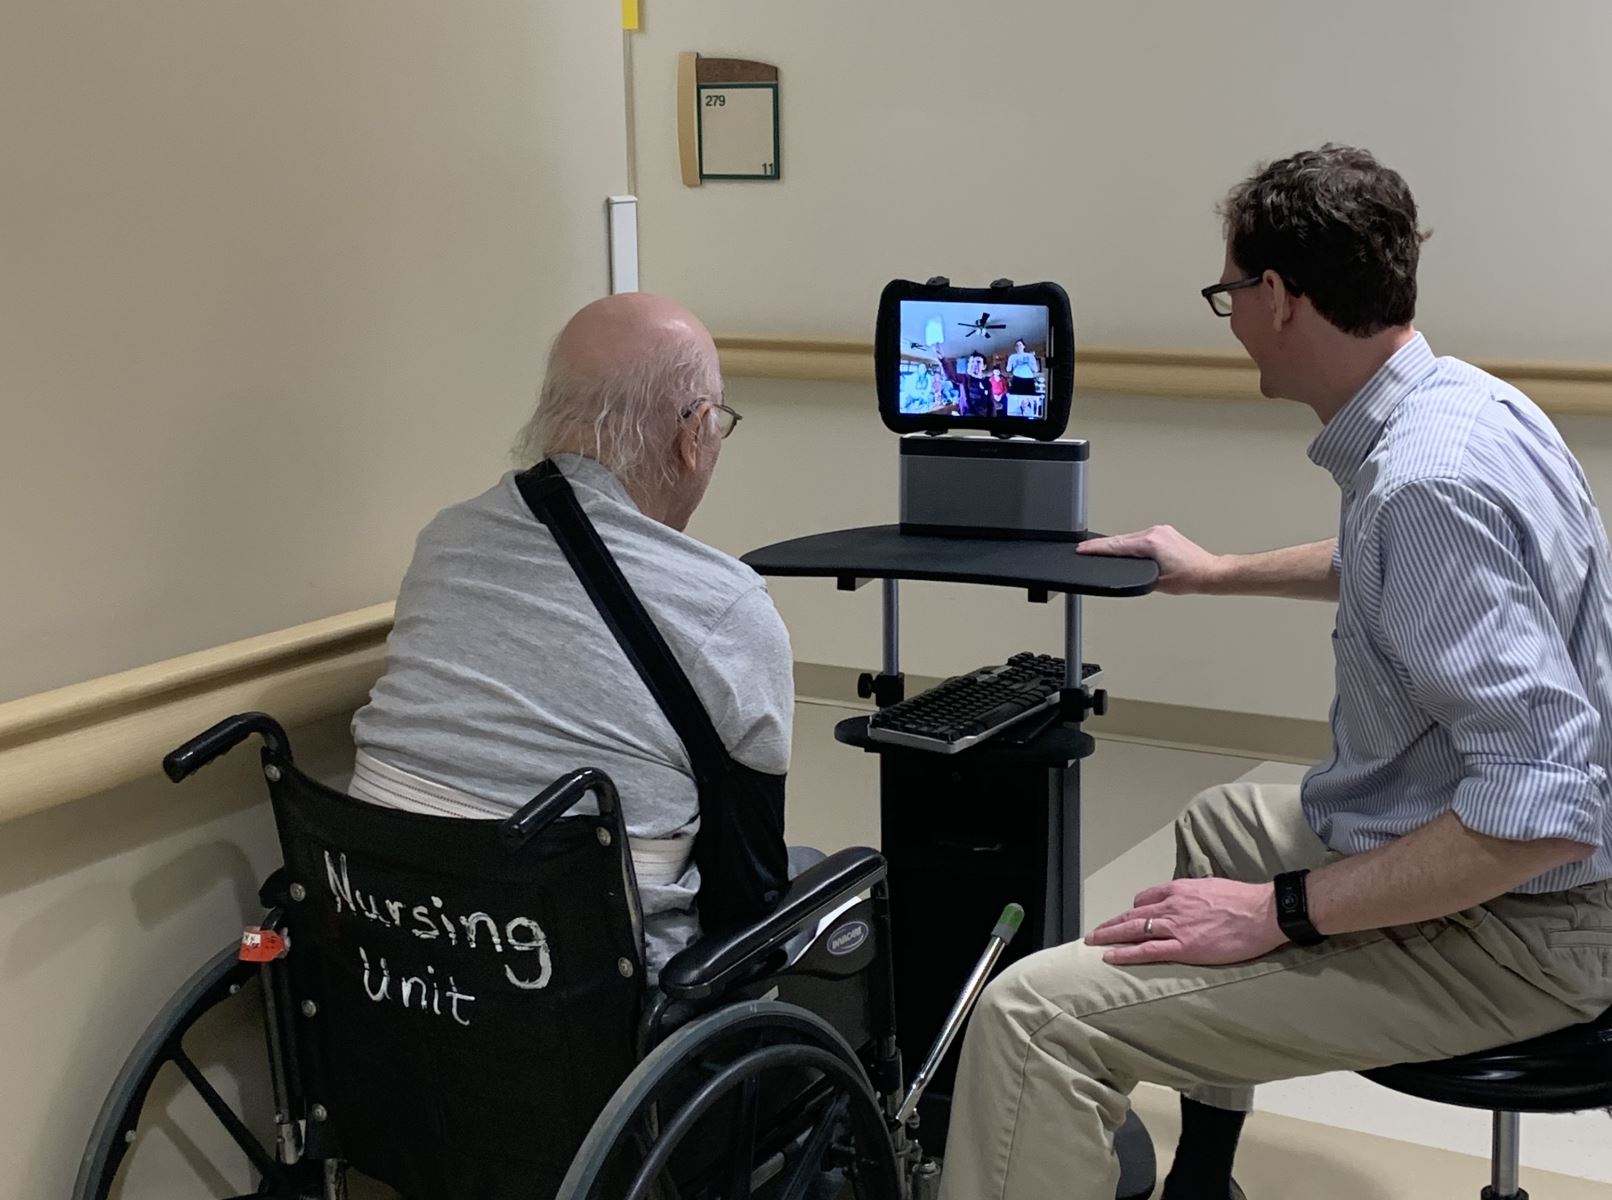 Family Sees Stroke Survivor's First Unassisted Steps Thanks to Telehealth Technology